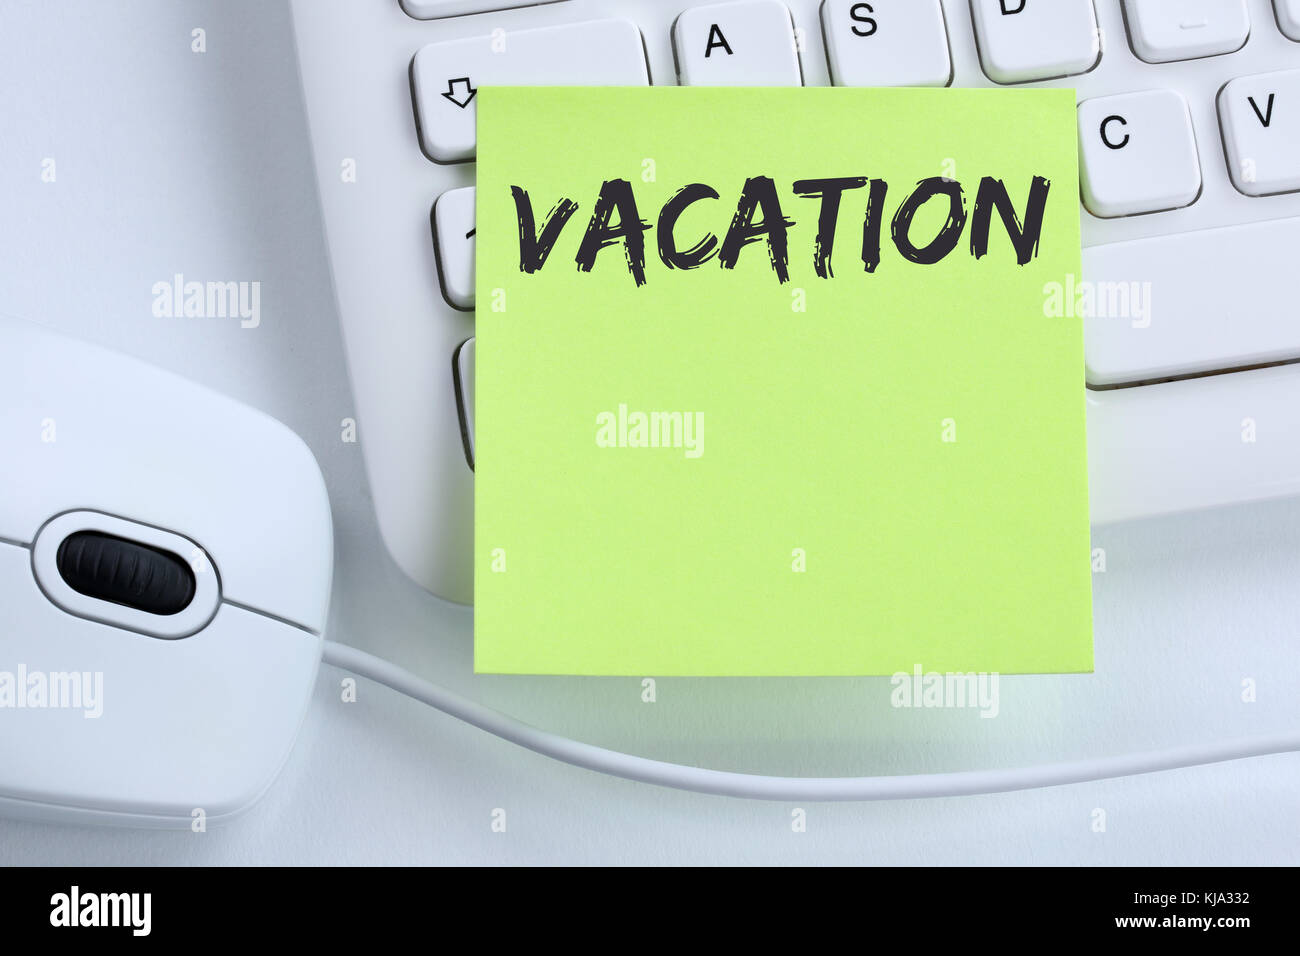 Vacation holiday holidays relax relaxed break free time business concept mouse computer keyboard Stock Photo